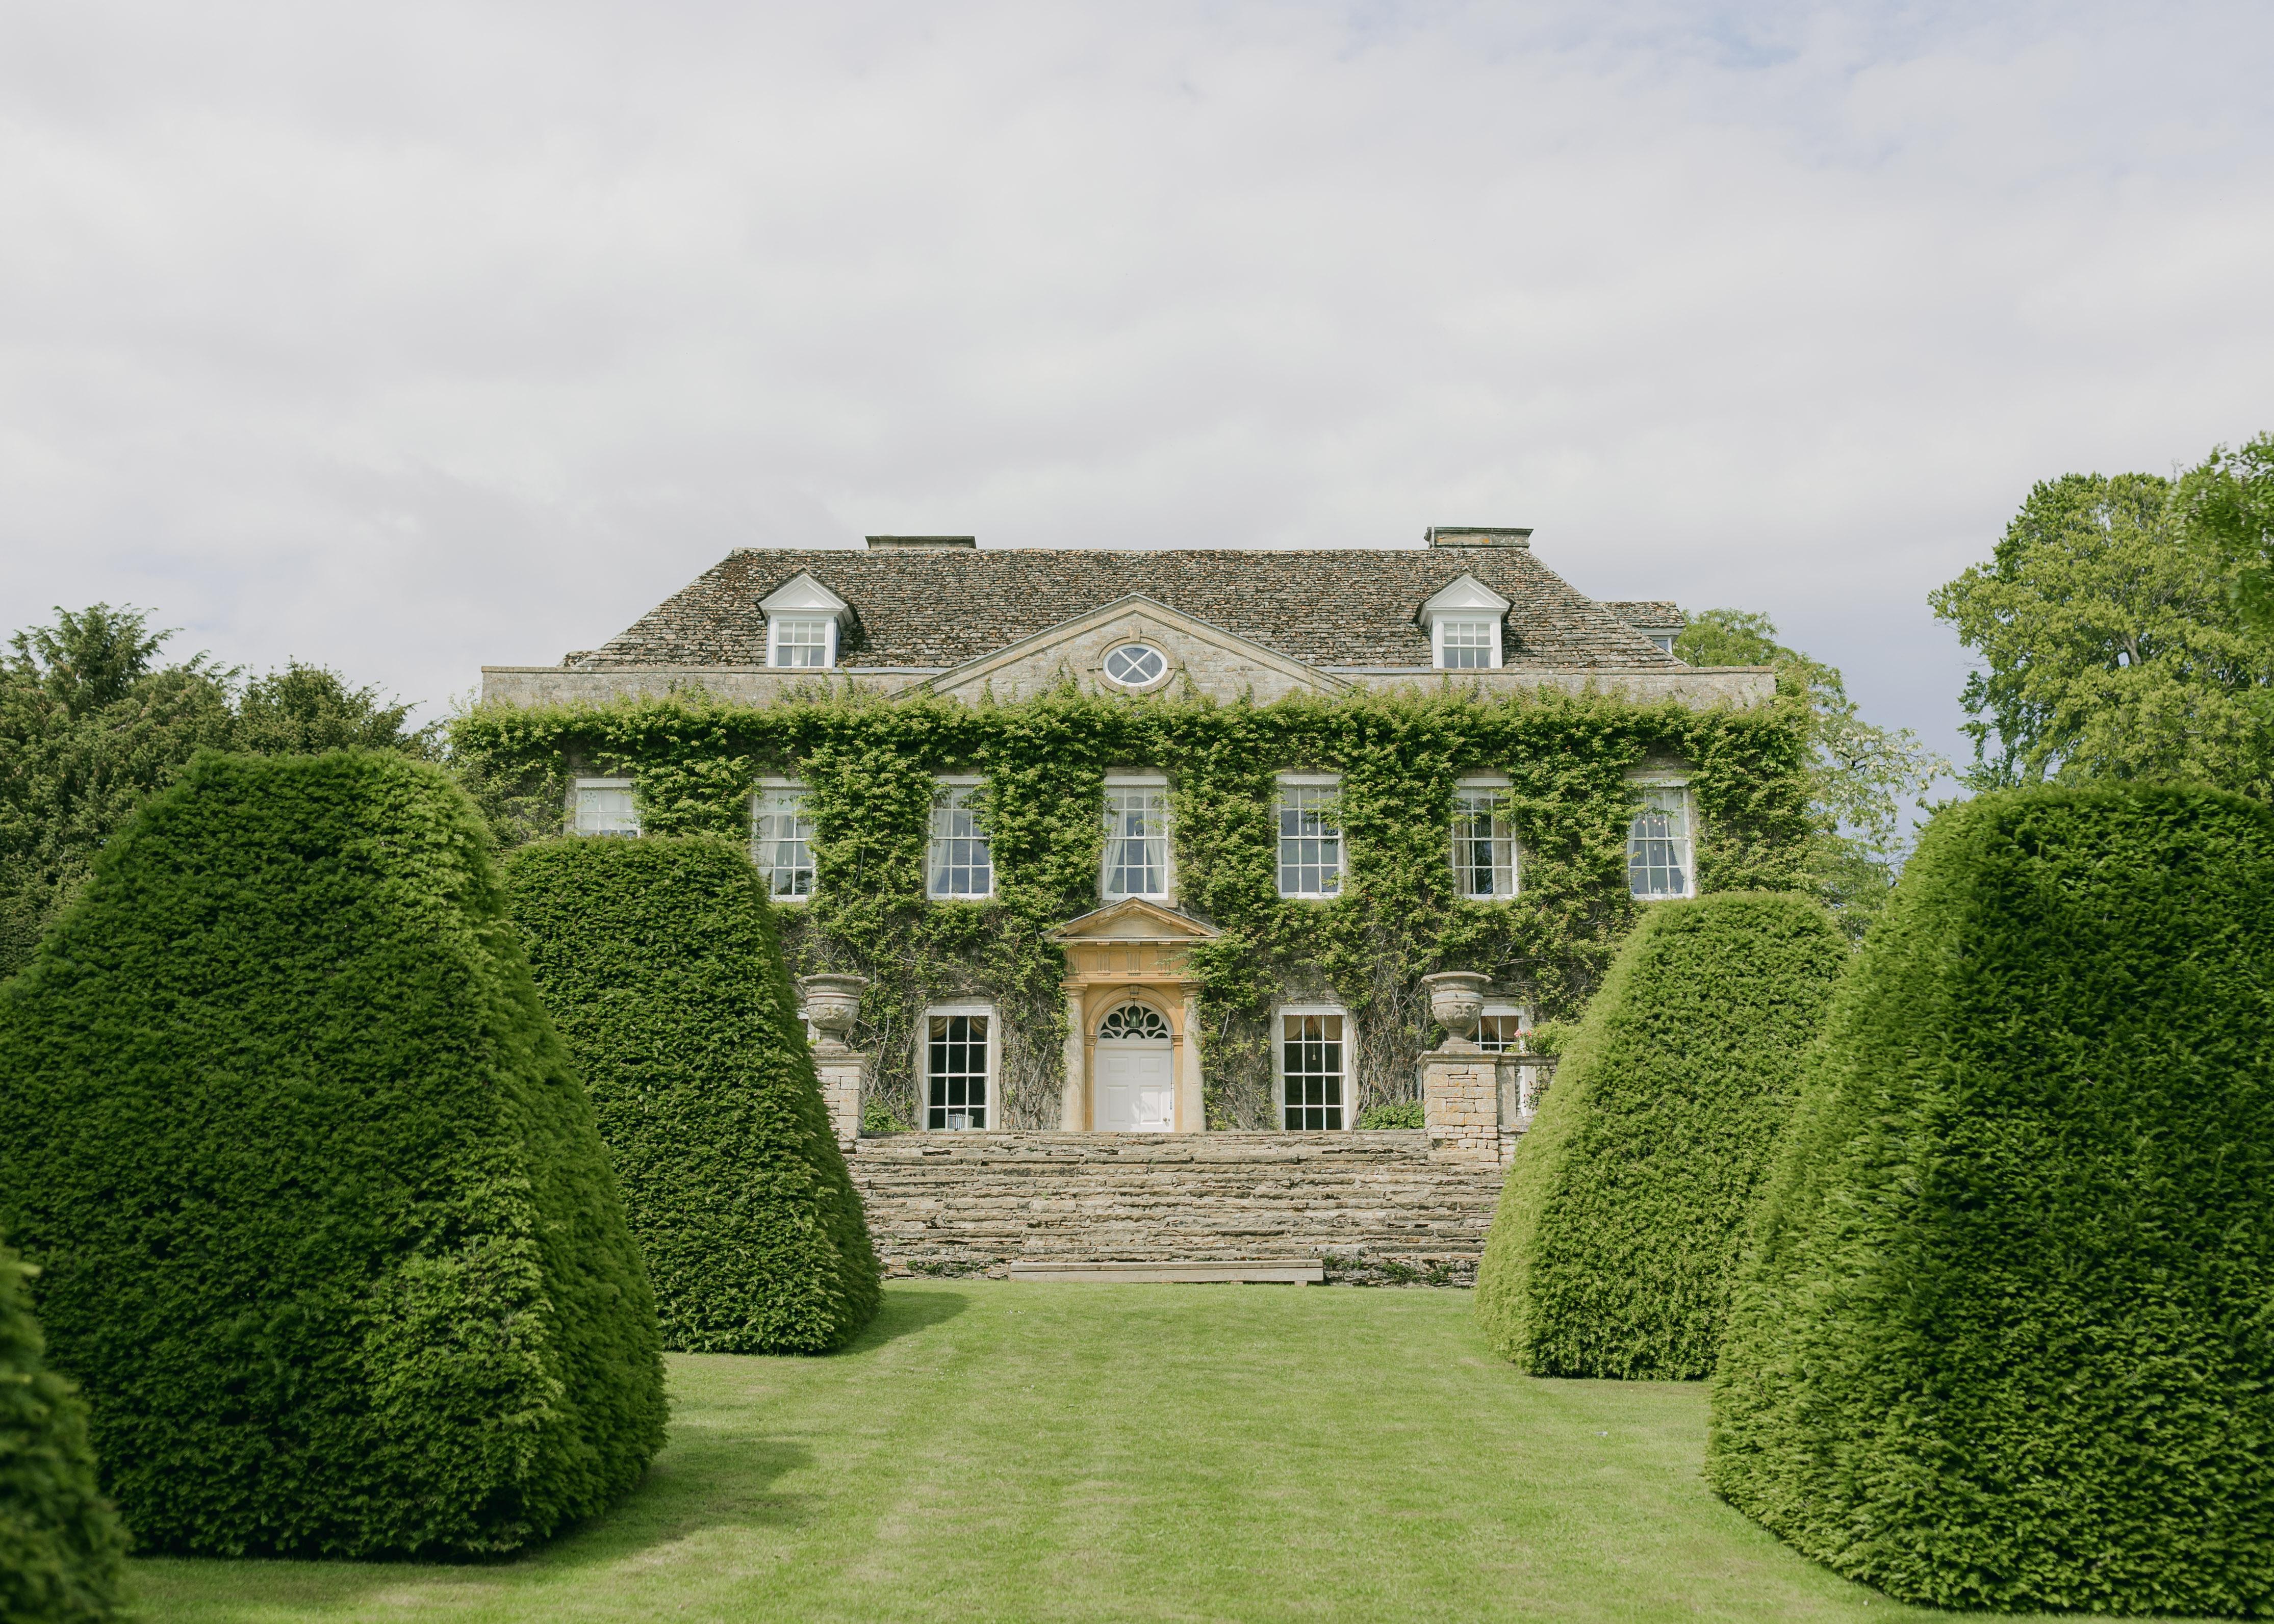 A Secret Garden Inspired Wedding in the Cotswolds at the House From “The Holiday”